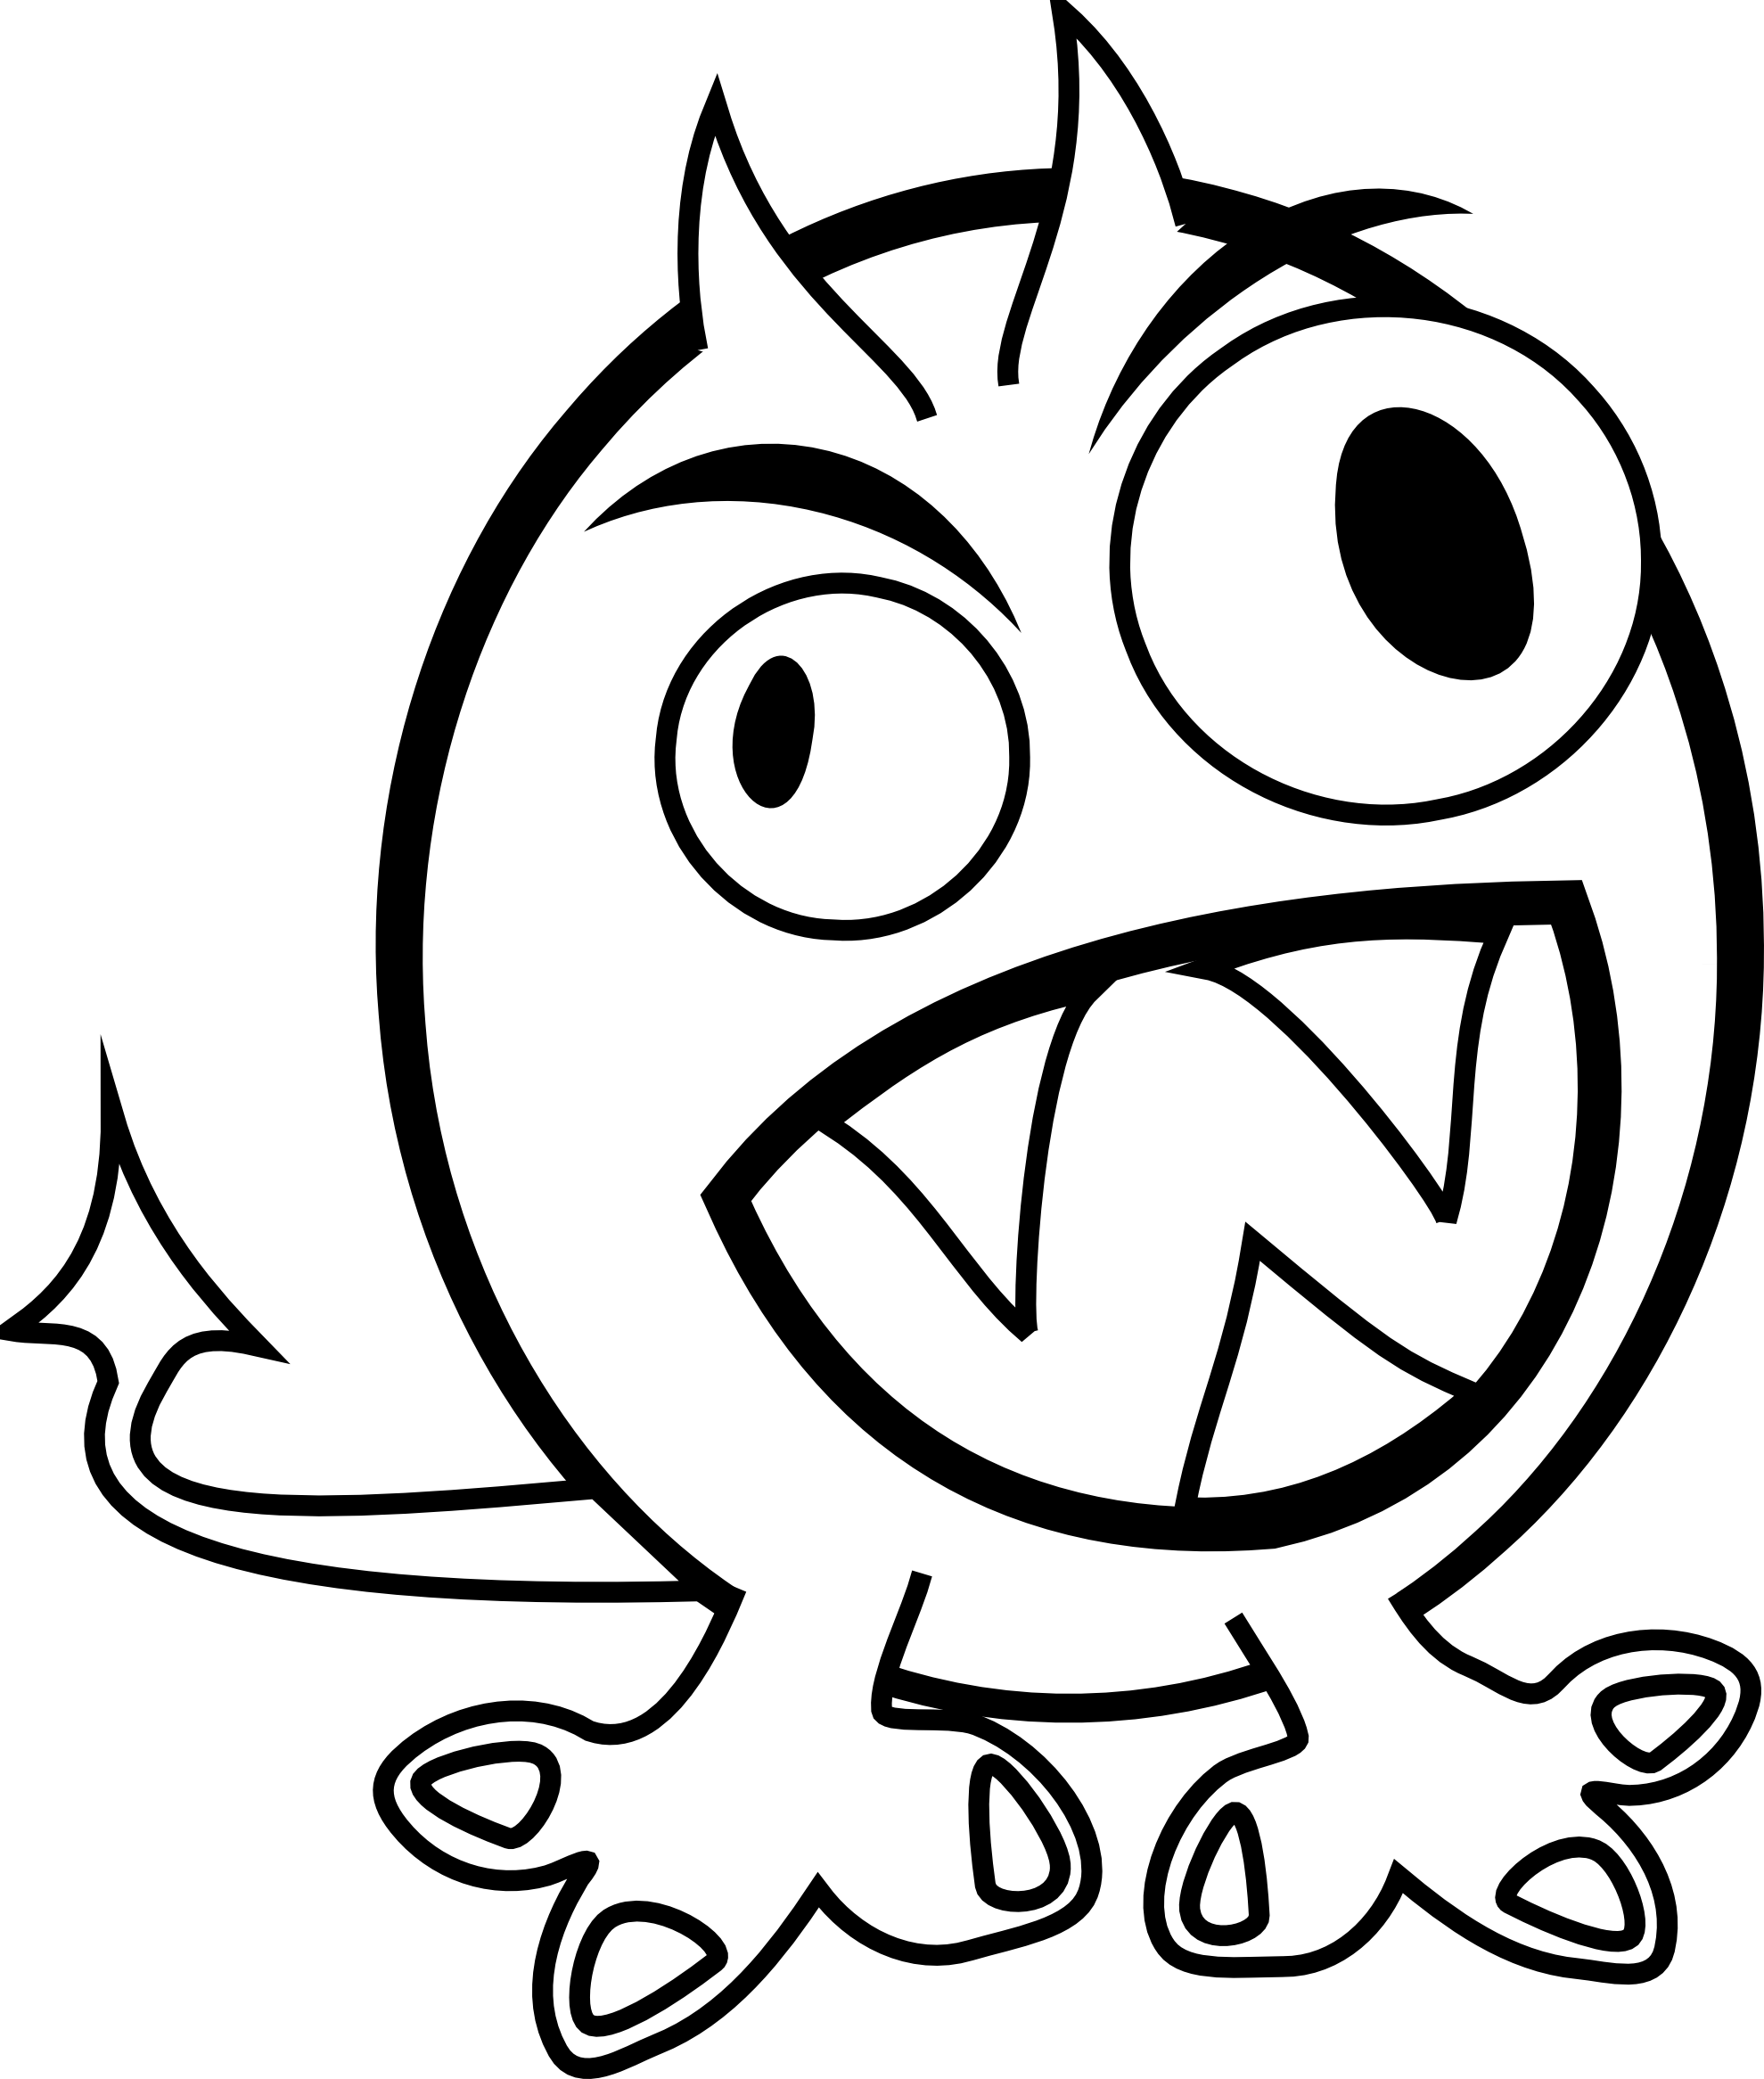 Free cliparts that you can download to you computer and use in your designs. Clip Art: small Funny Angry Monster Black White .